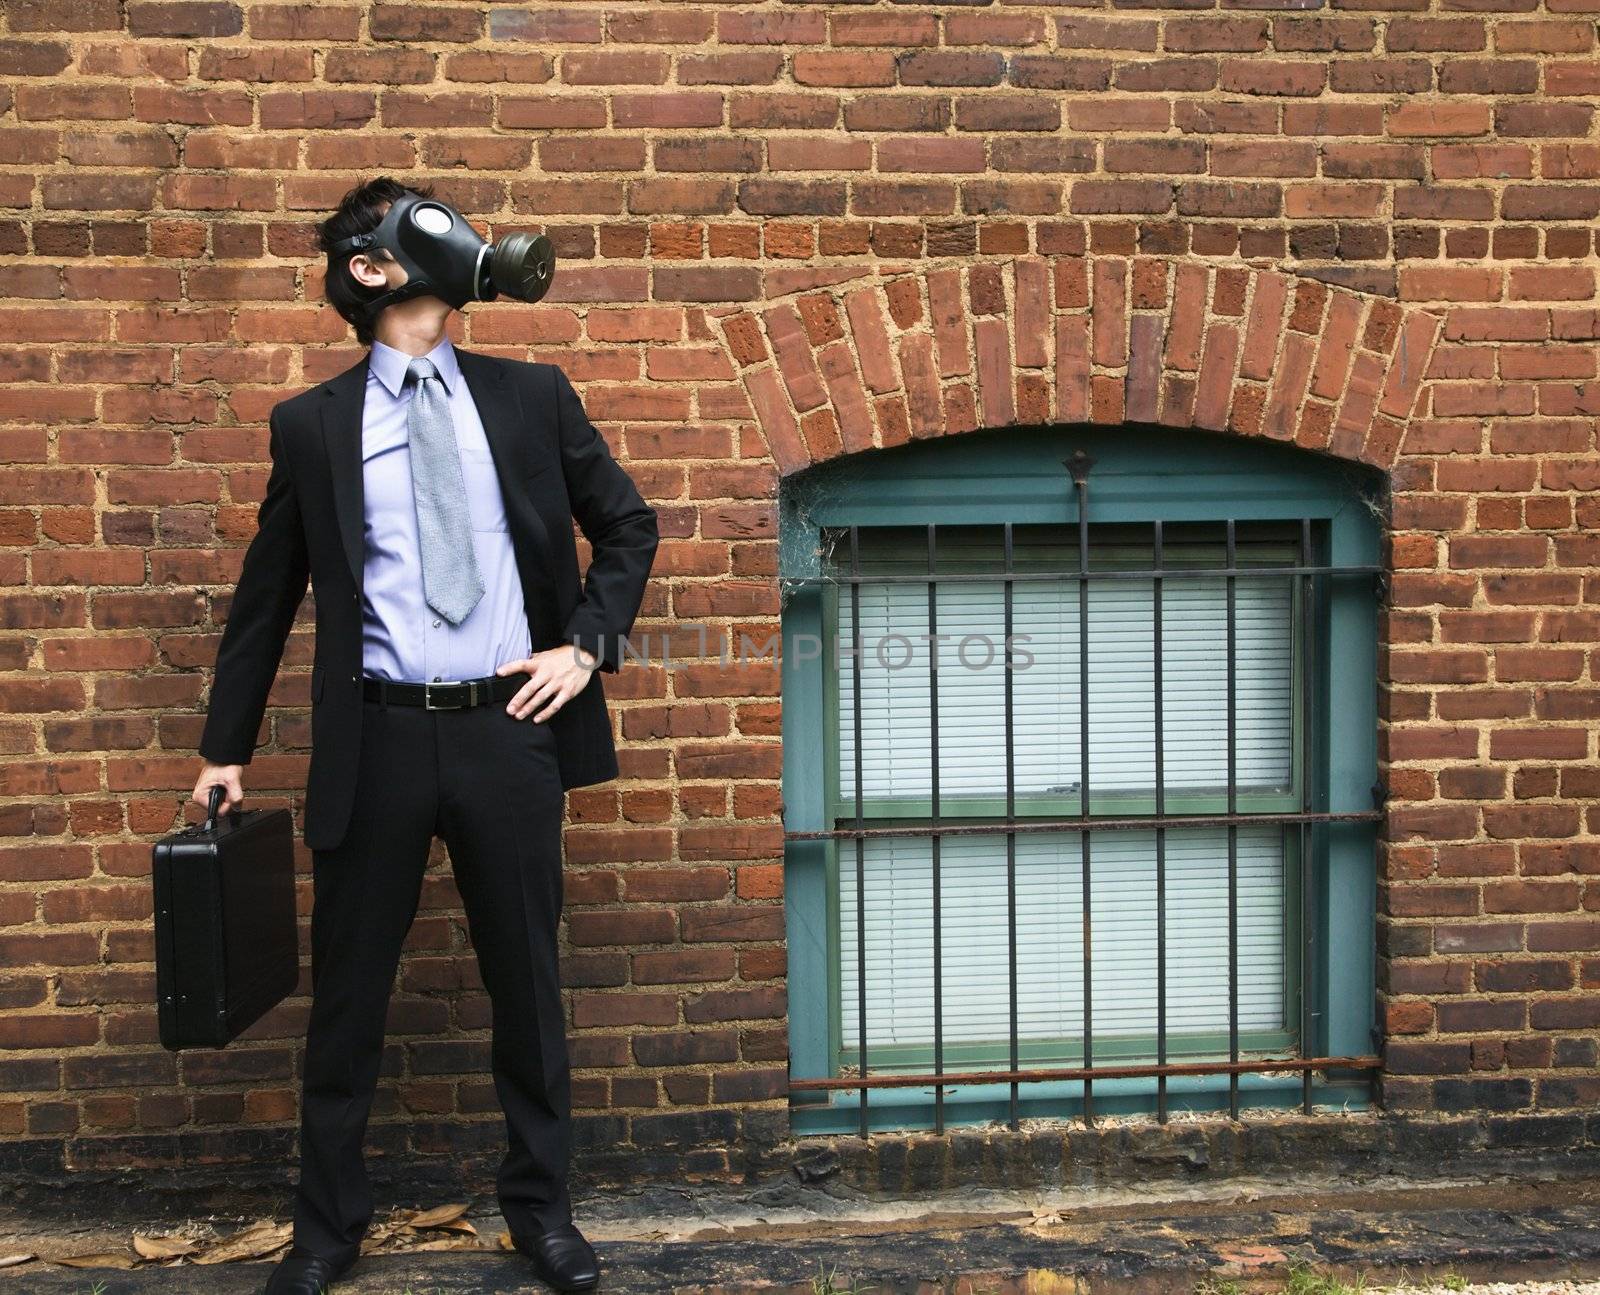 Businessman standing next to brick wall and looking off to side wearing gas mask.